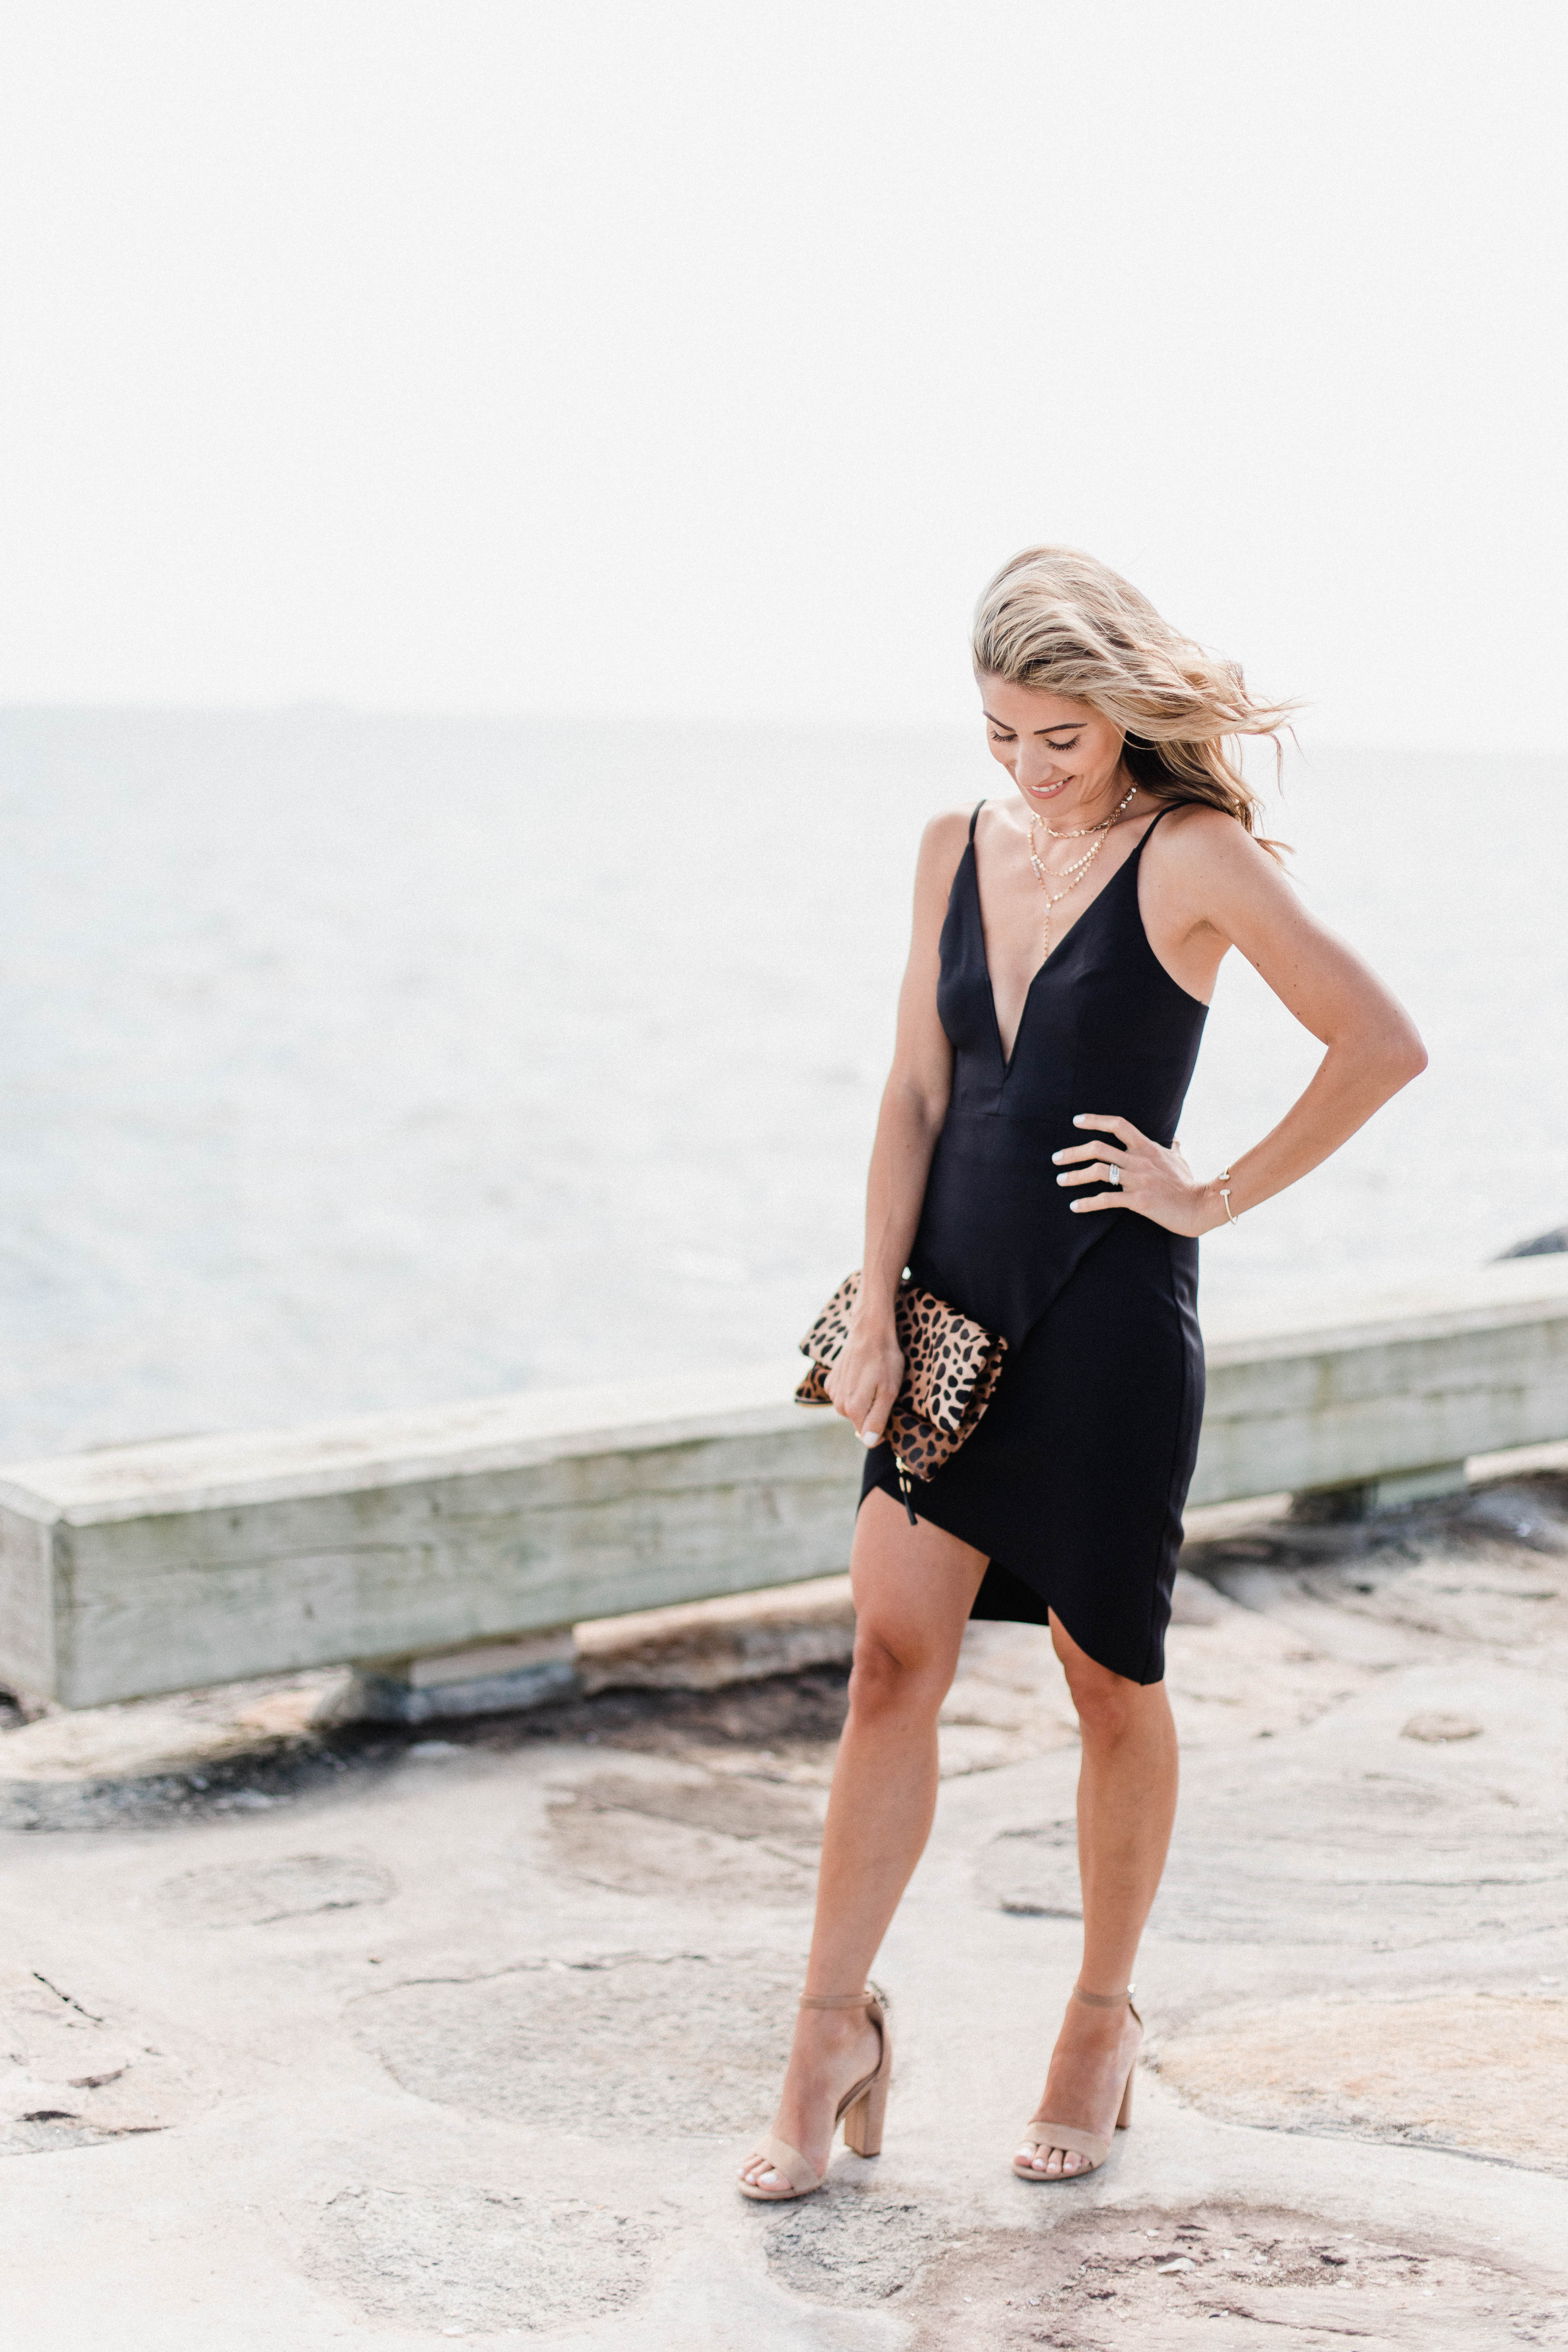 Connecticut life and style blogger Lauren McBride shares Summer Wedding Guest Dress options, as well as how to transition them to the fall season.